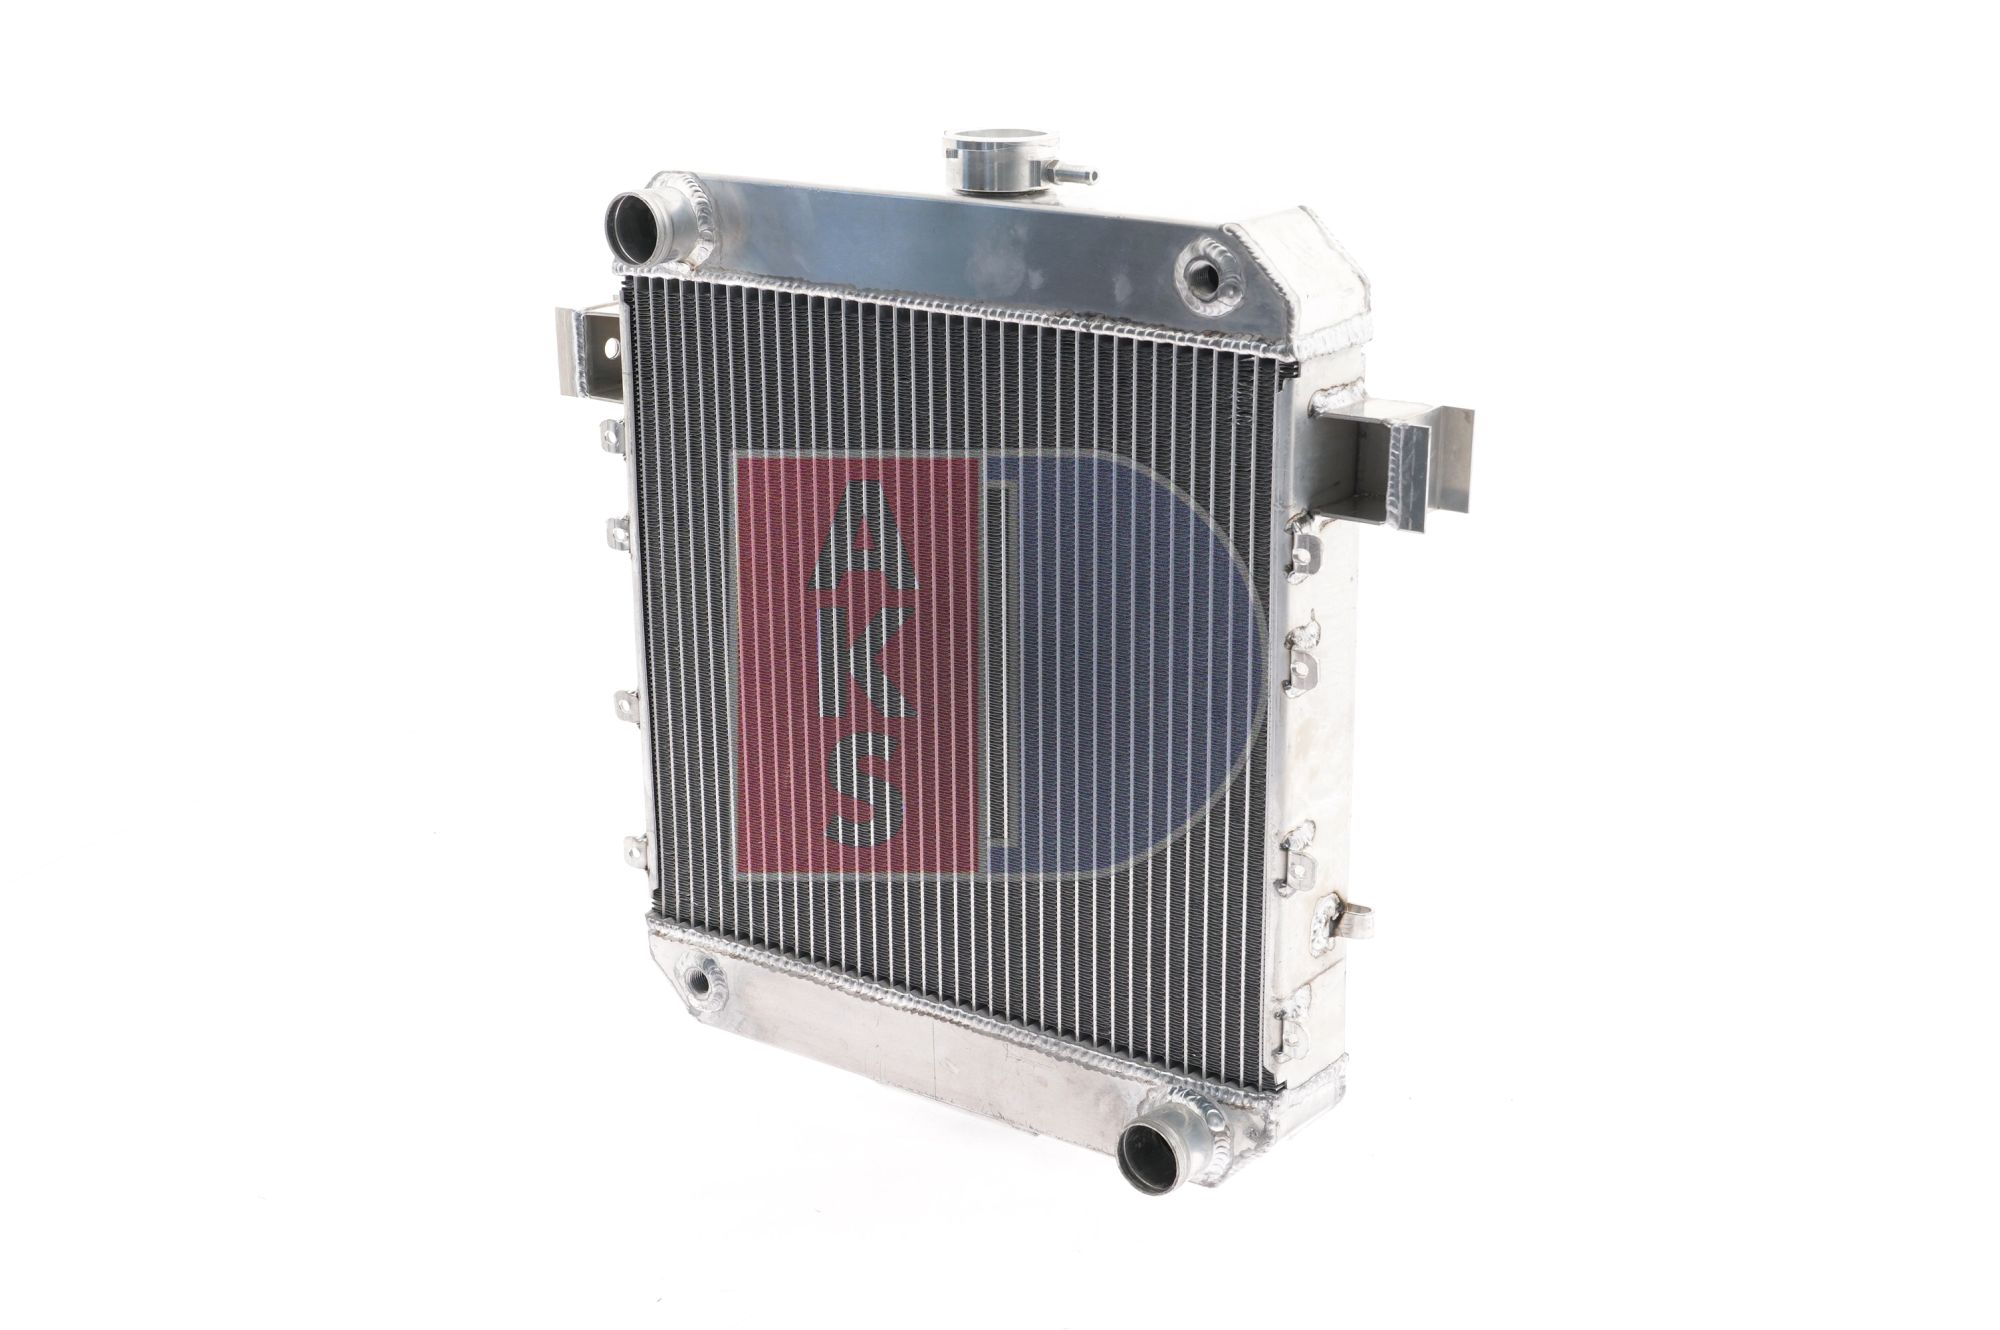 AKS DASIS Aluminium, 325 x 380 x 56 mm, with threaded connection for temperature sensor, Manual Transmission, Brazed cooling fins Radiator 150080AL buy